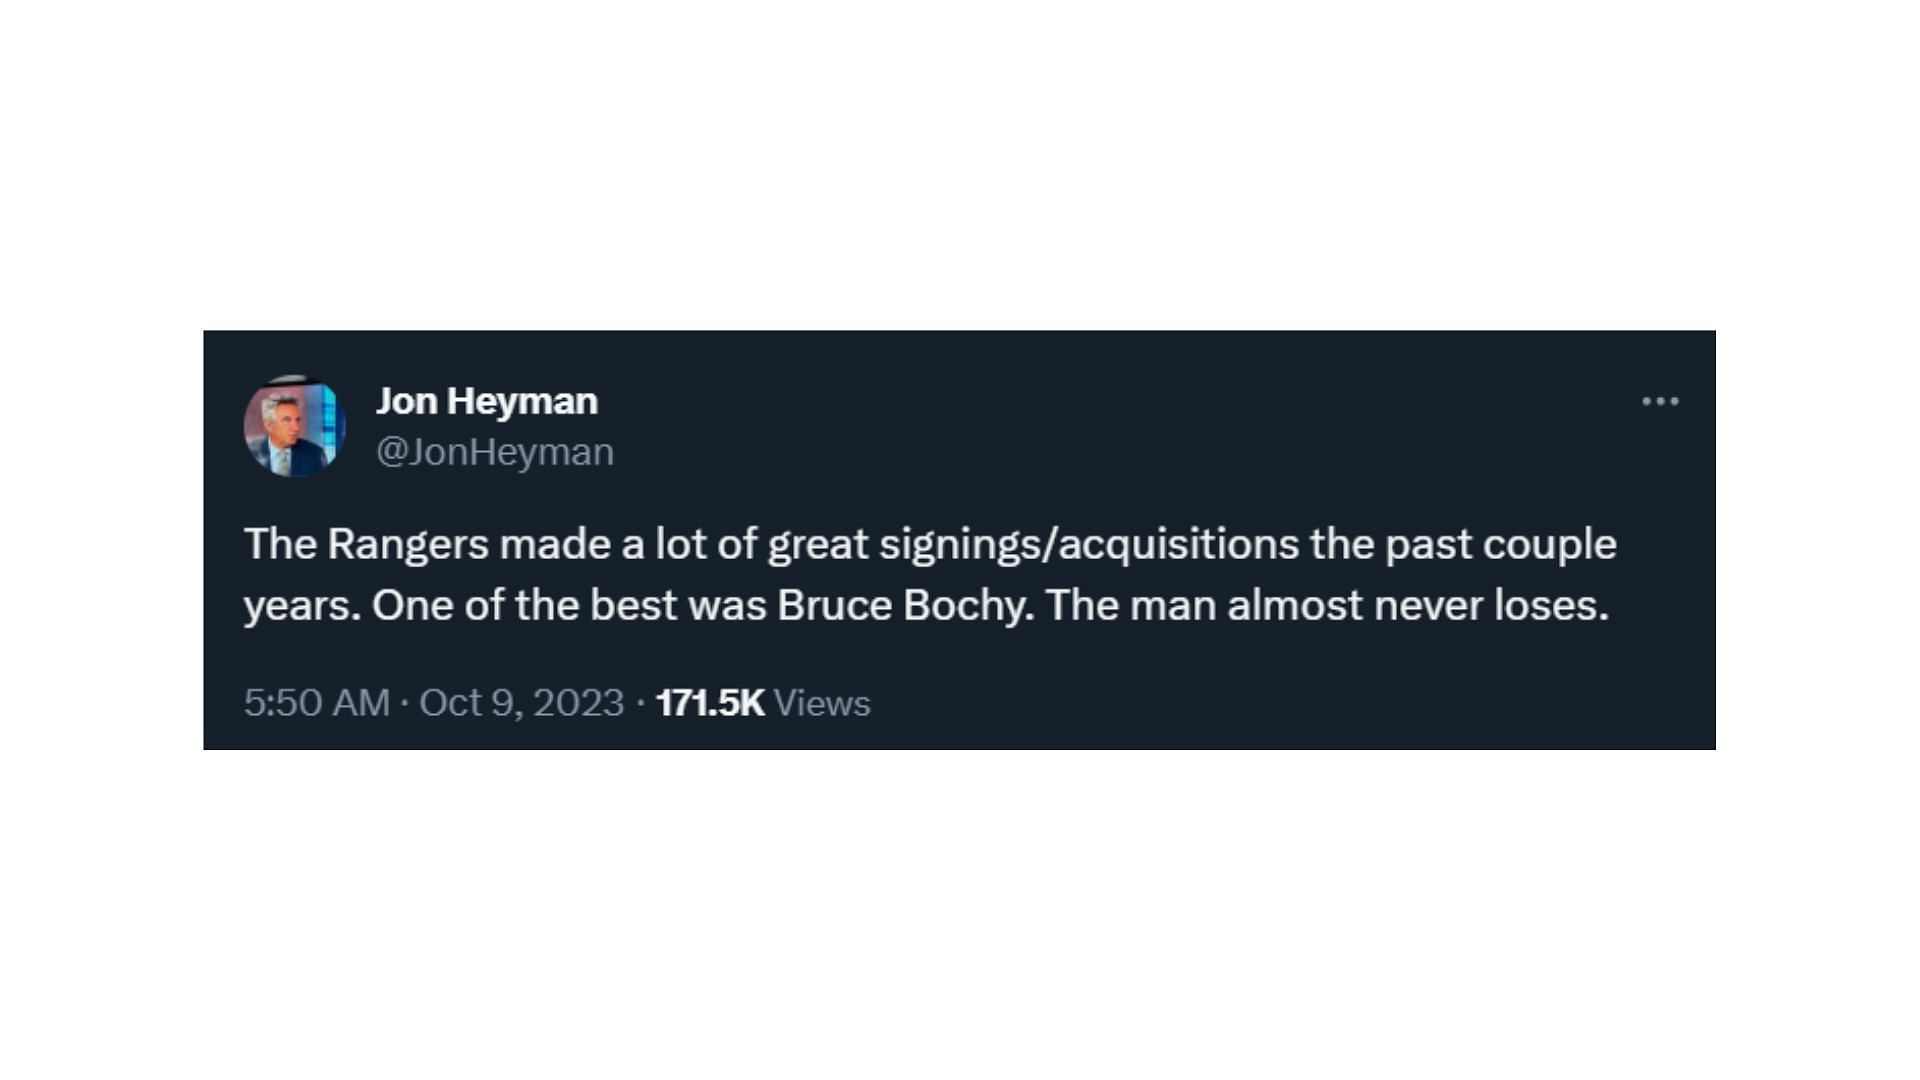 Jon Heyman&#039;s tweet about Bruce Bochy&#039;s record as manager